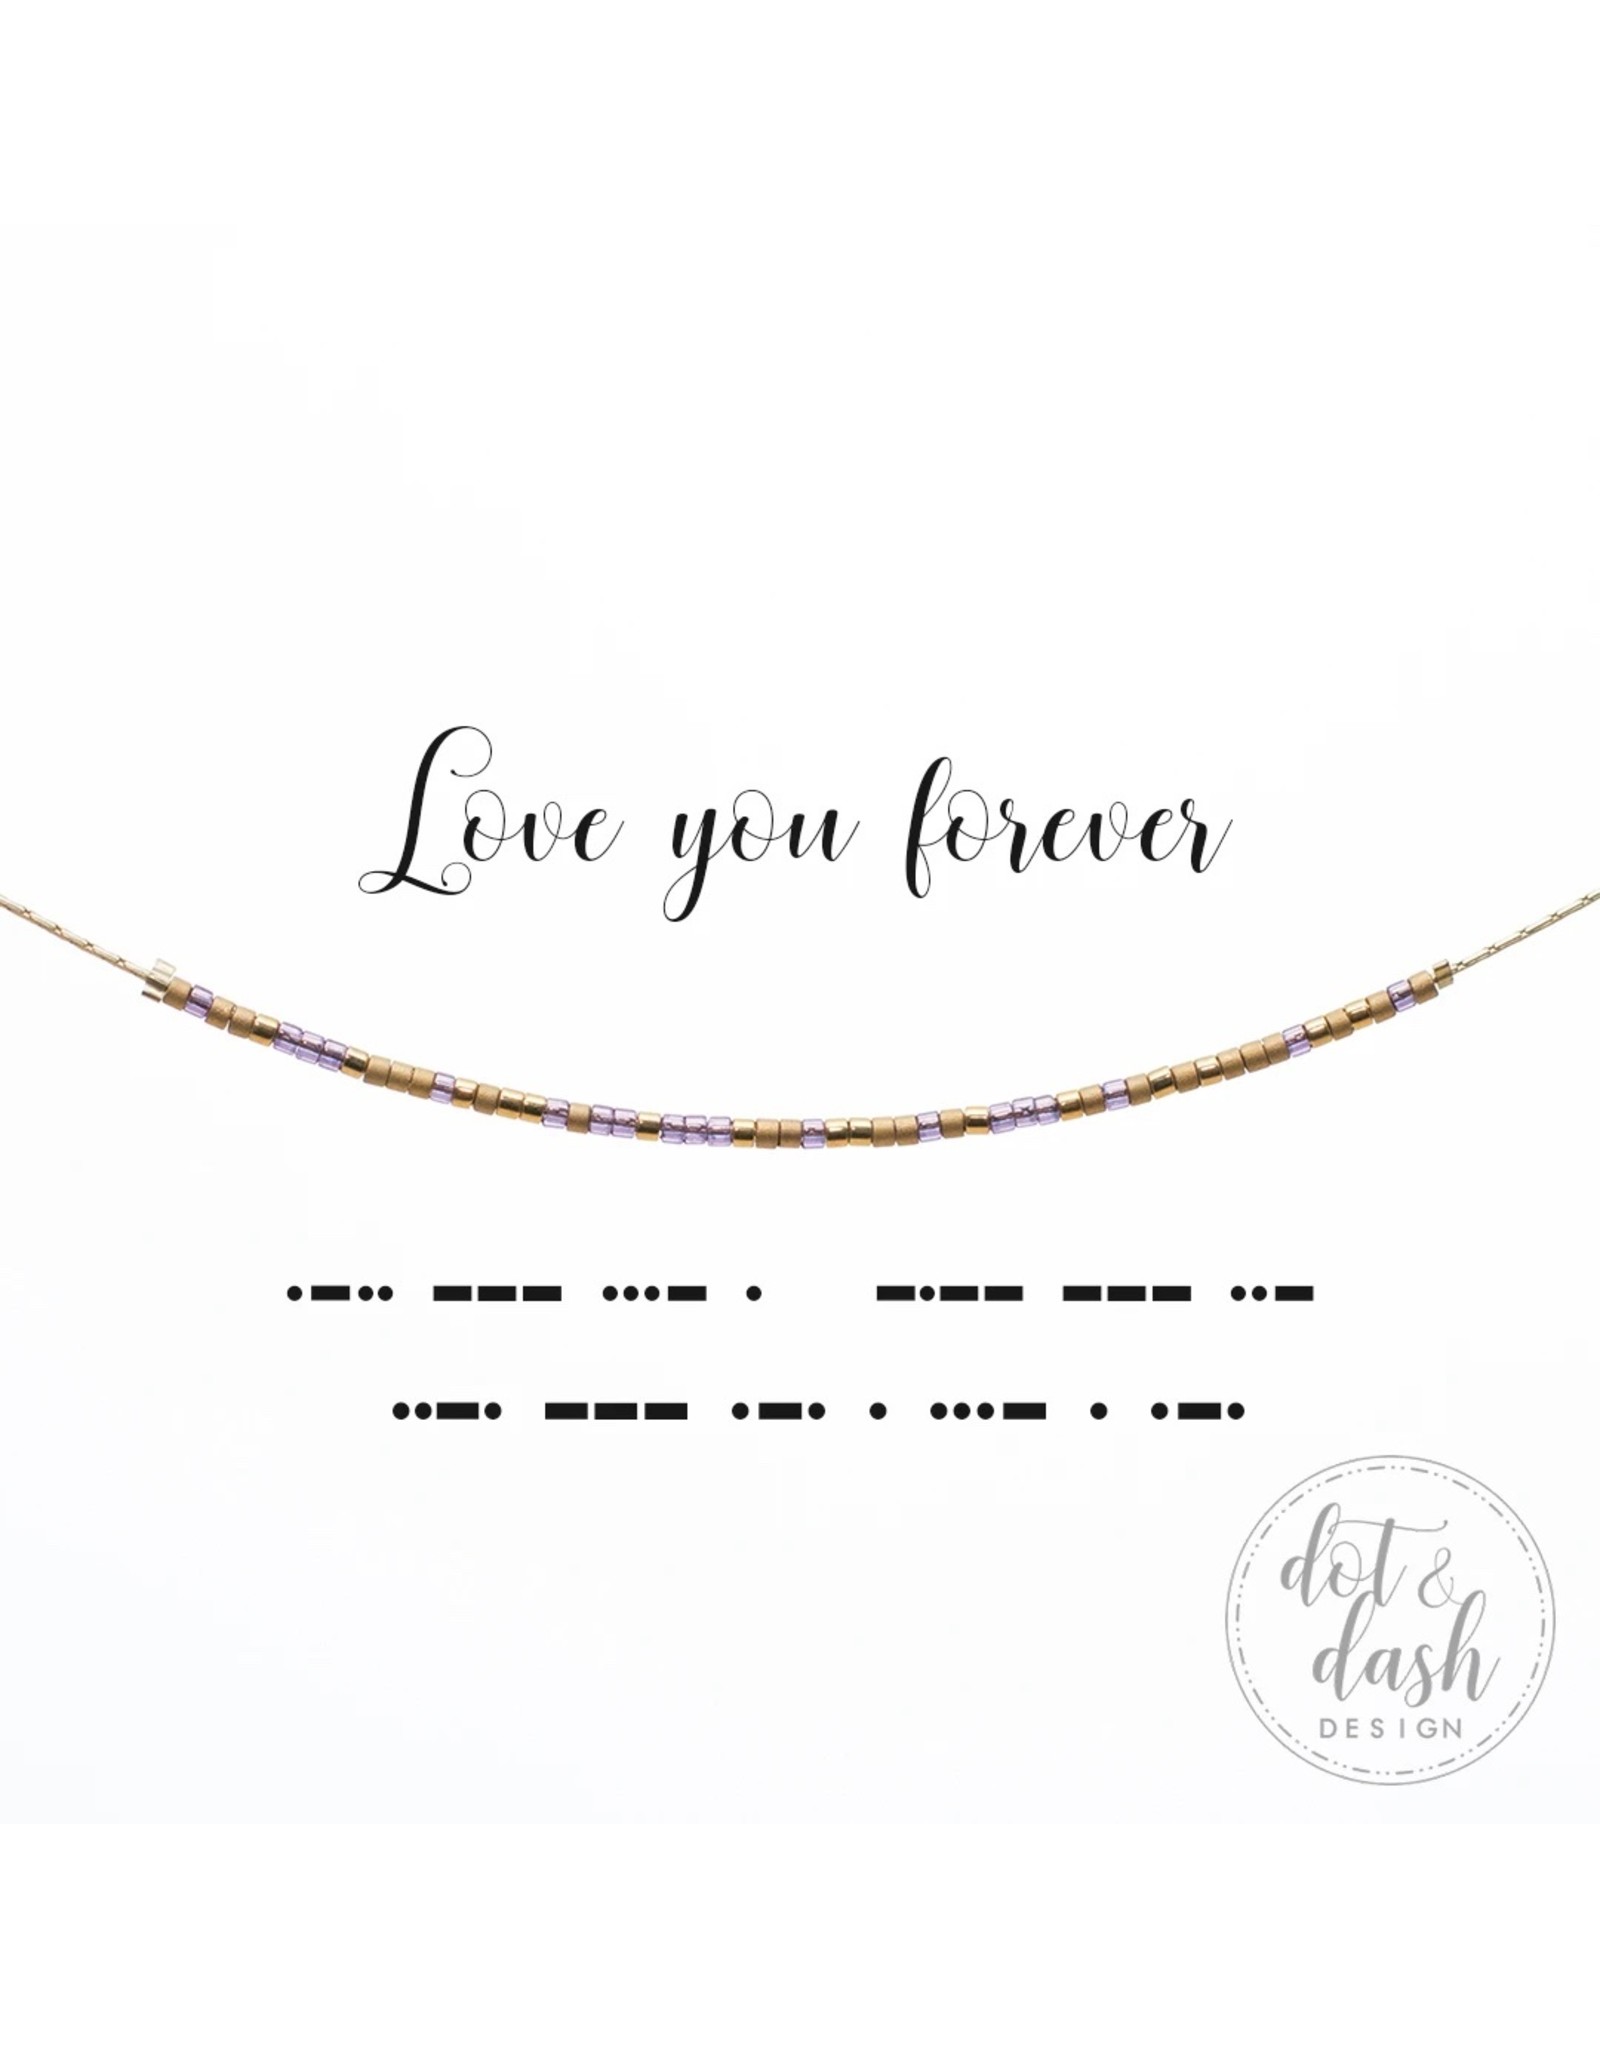 Dot And Dash Designs Love You Forever Necklace